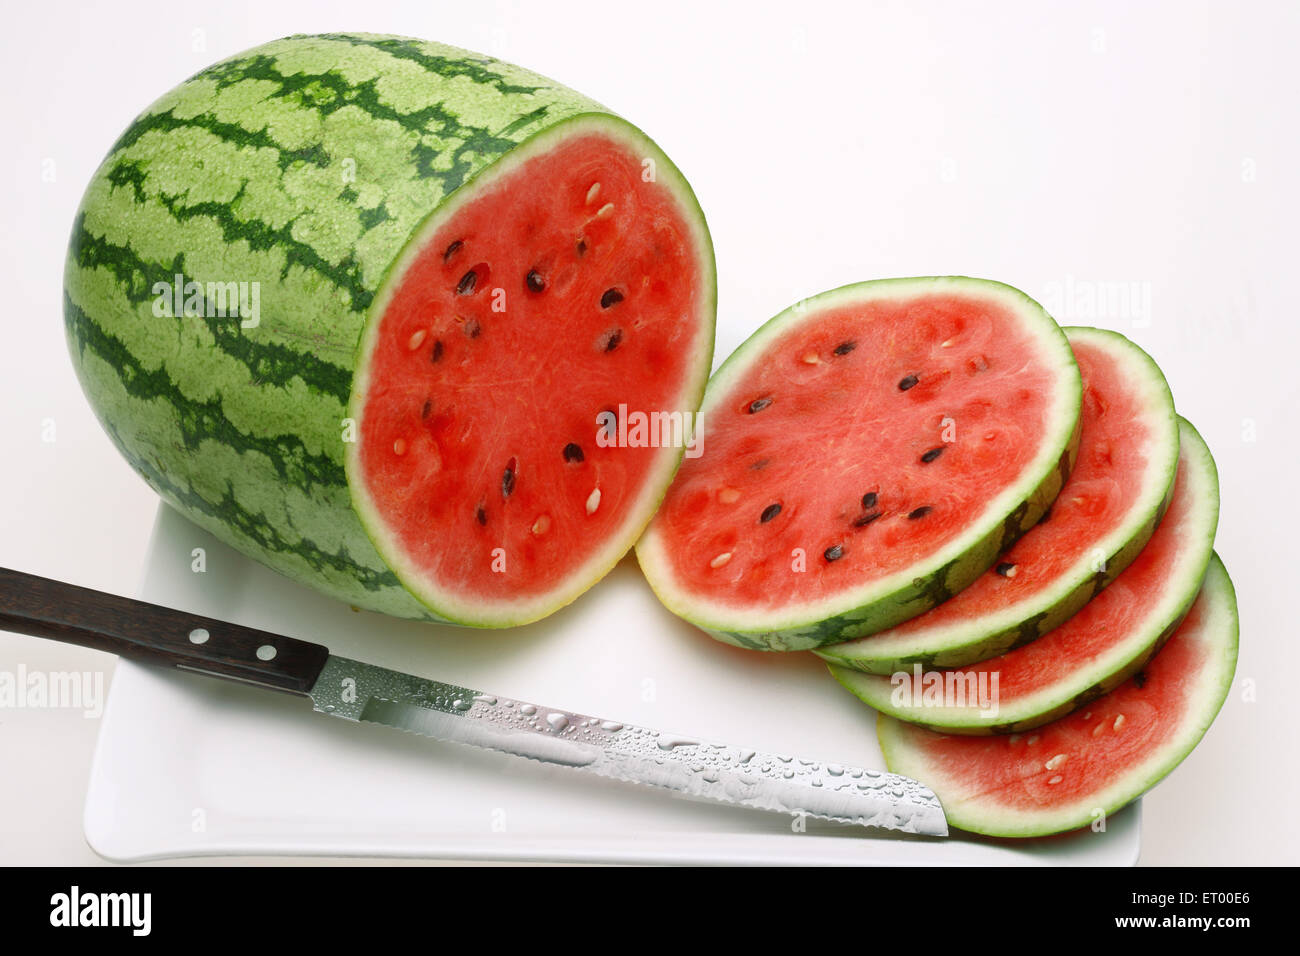 Fruits ; Water Melon Latin Citrullus Lanatus slices and knife on a tray Stock Photo